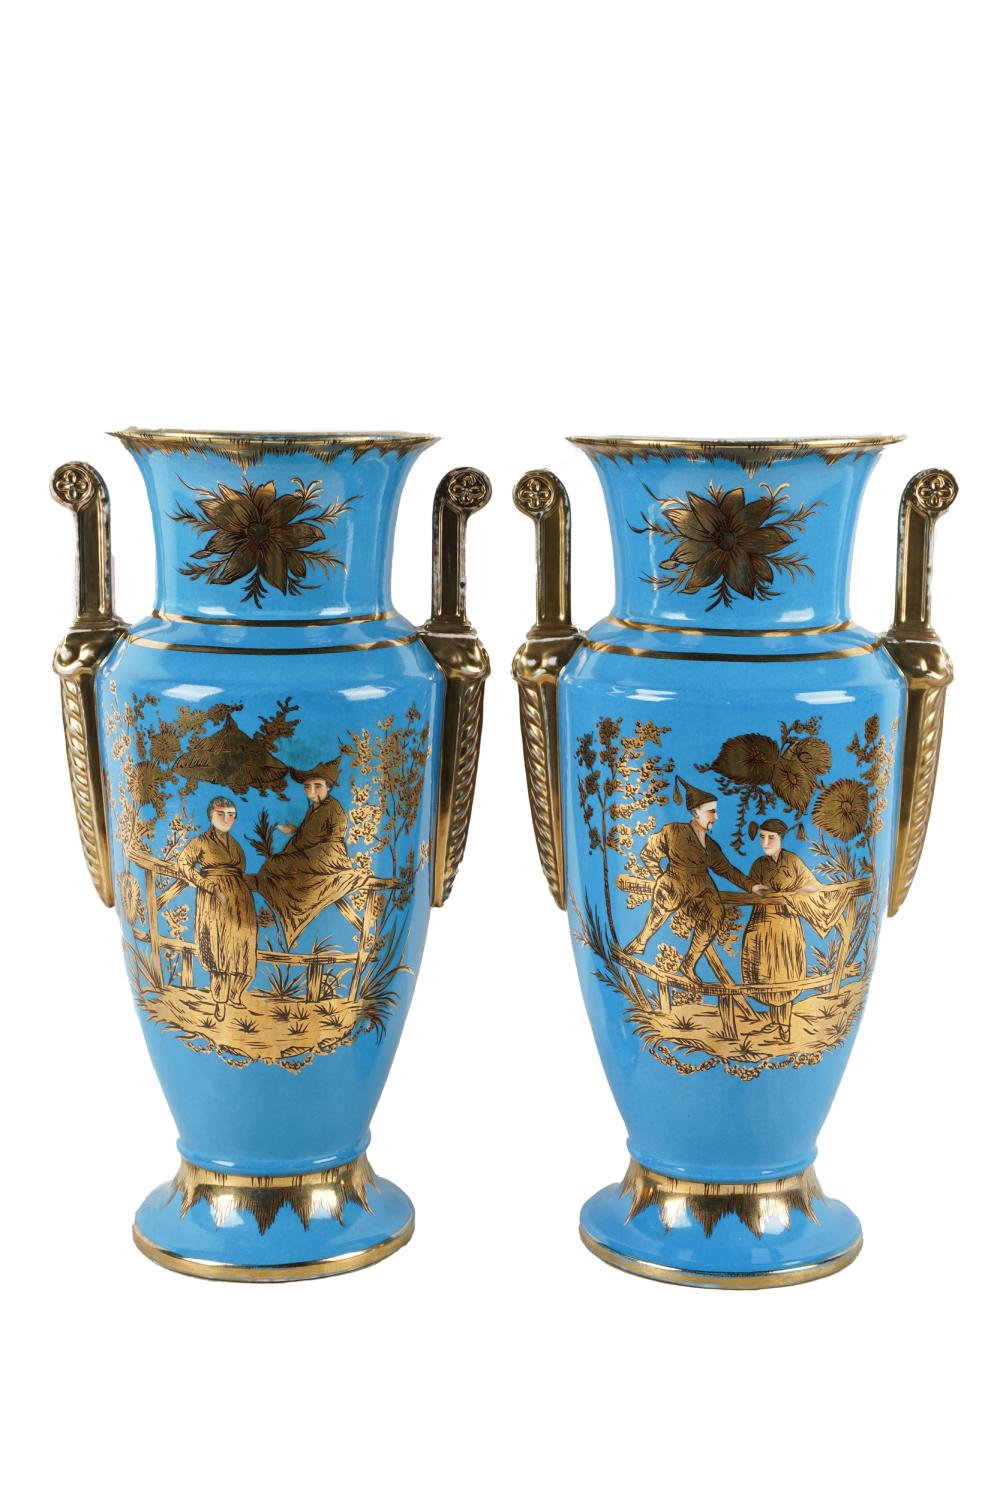 PAIR OF FRENCH PORCELAIN CHINOISERIE 332e65